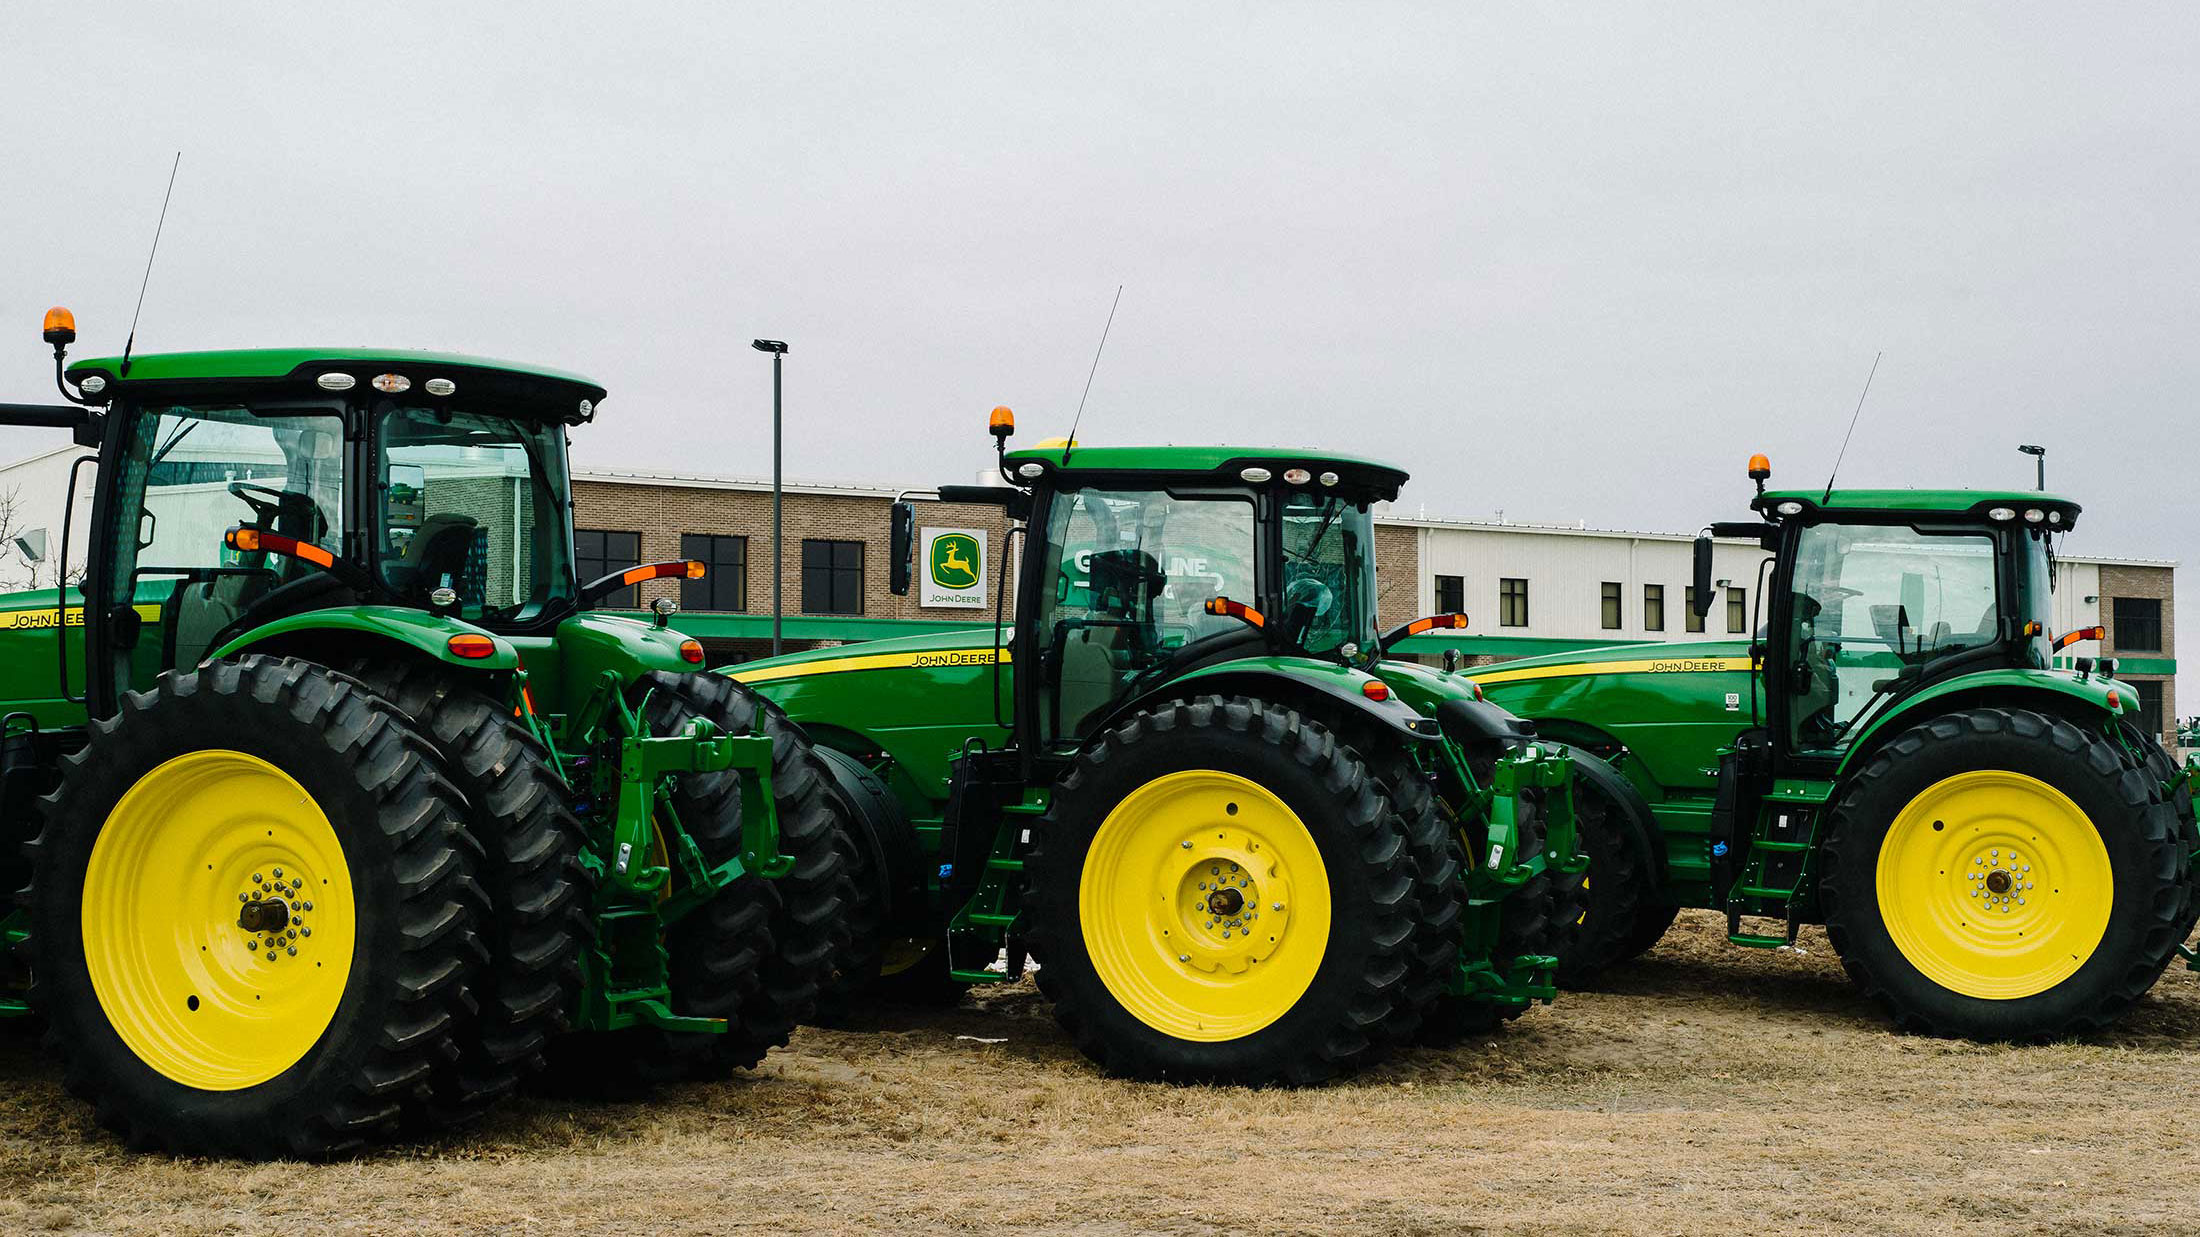 John Deere says it will make the tractor of the future — no driver needed